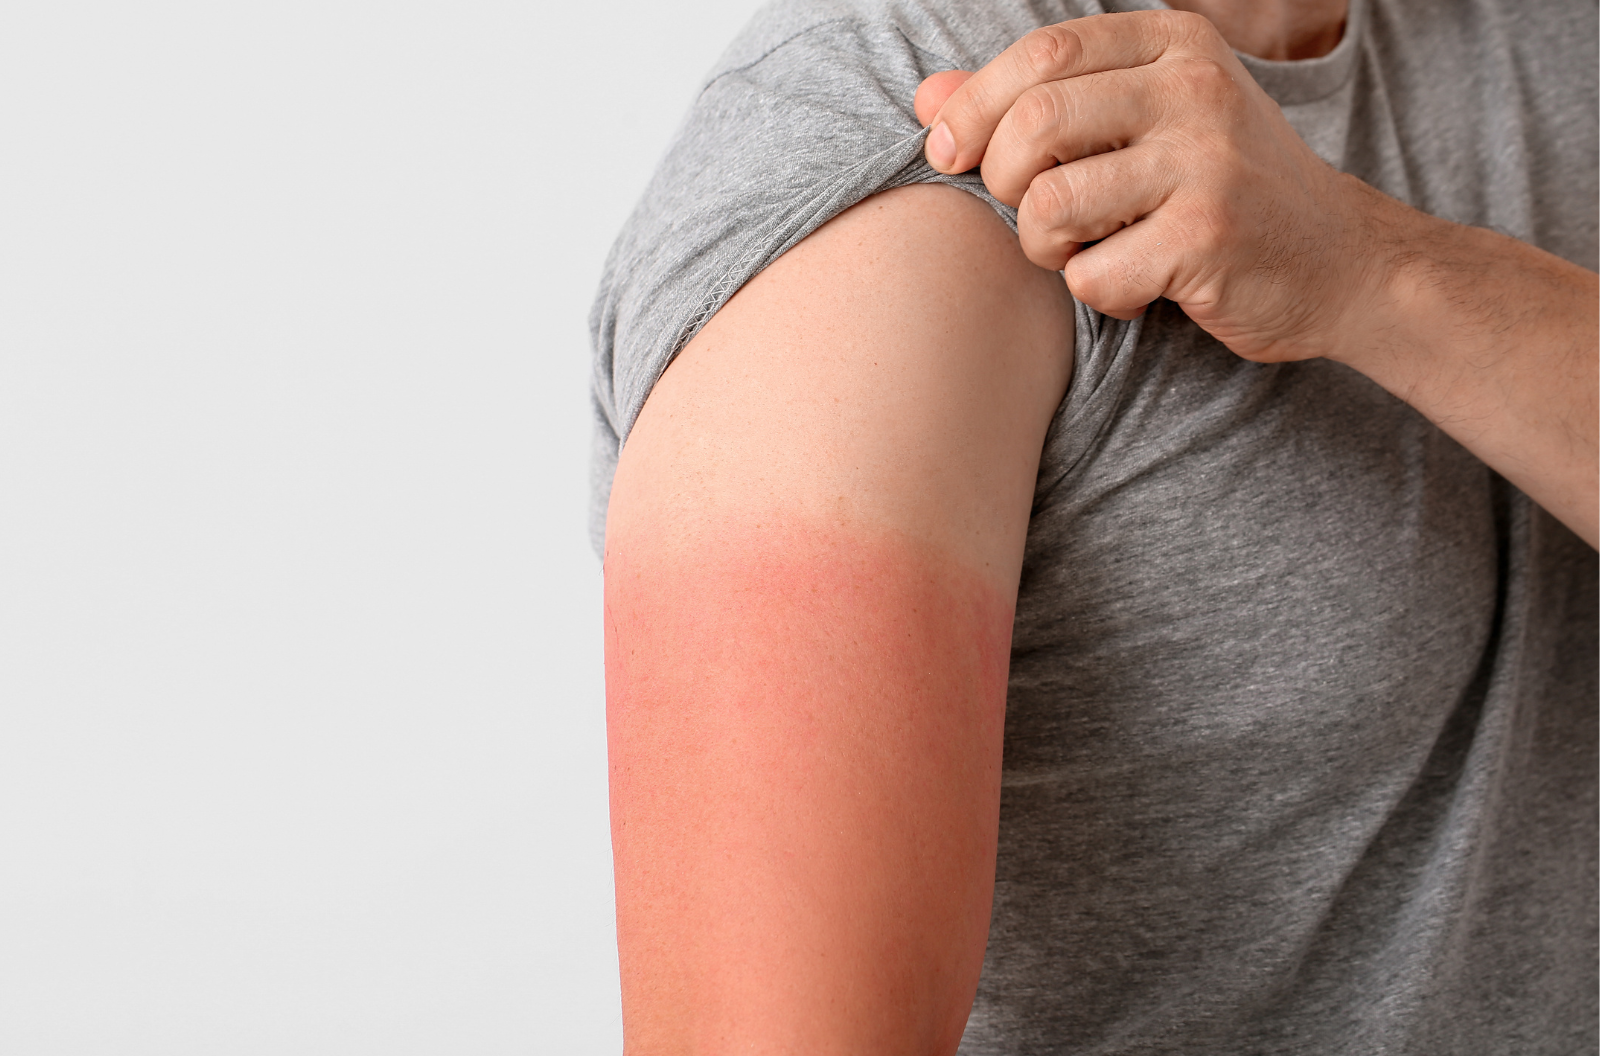 A man’s arm with the skin sunburned on the lower half.